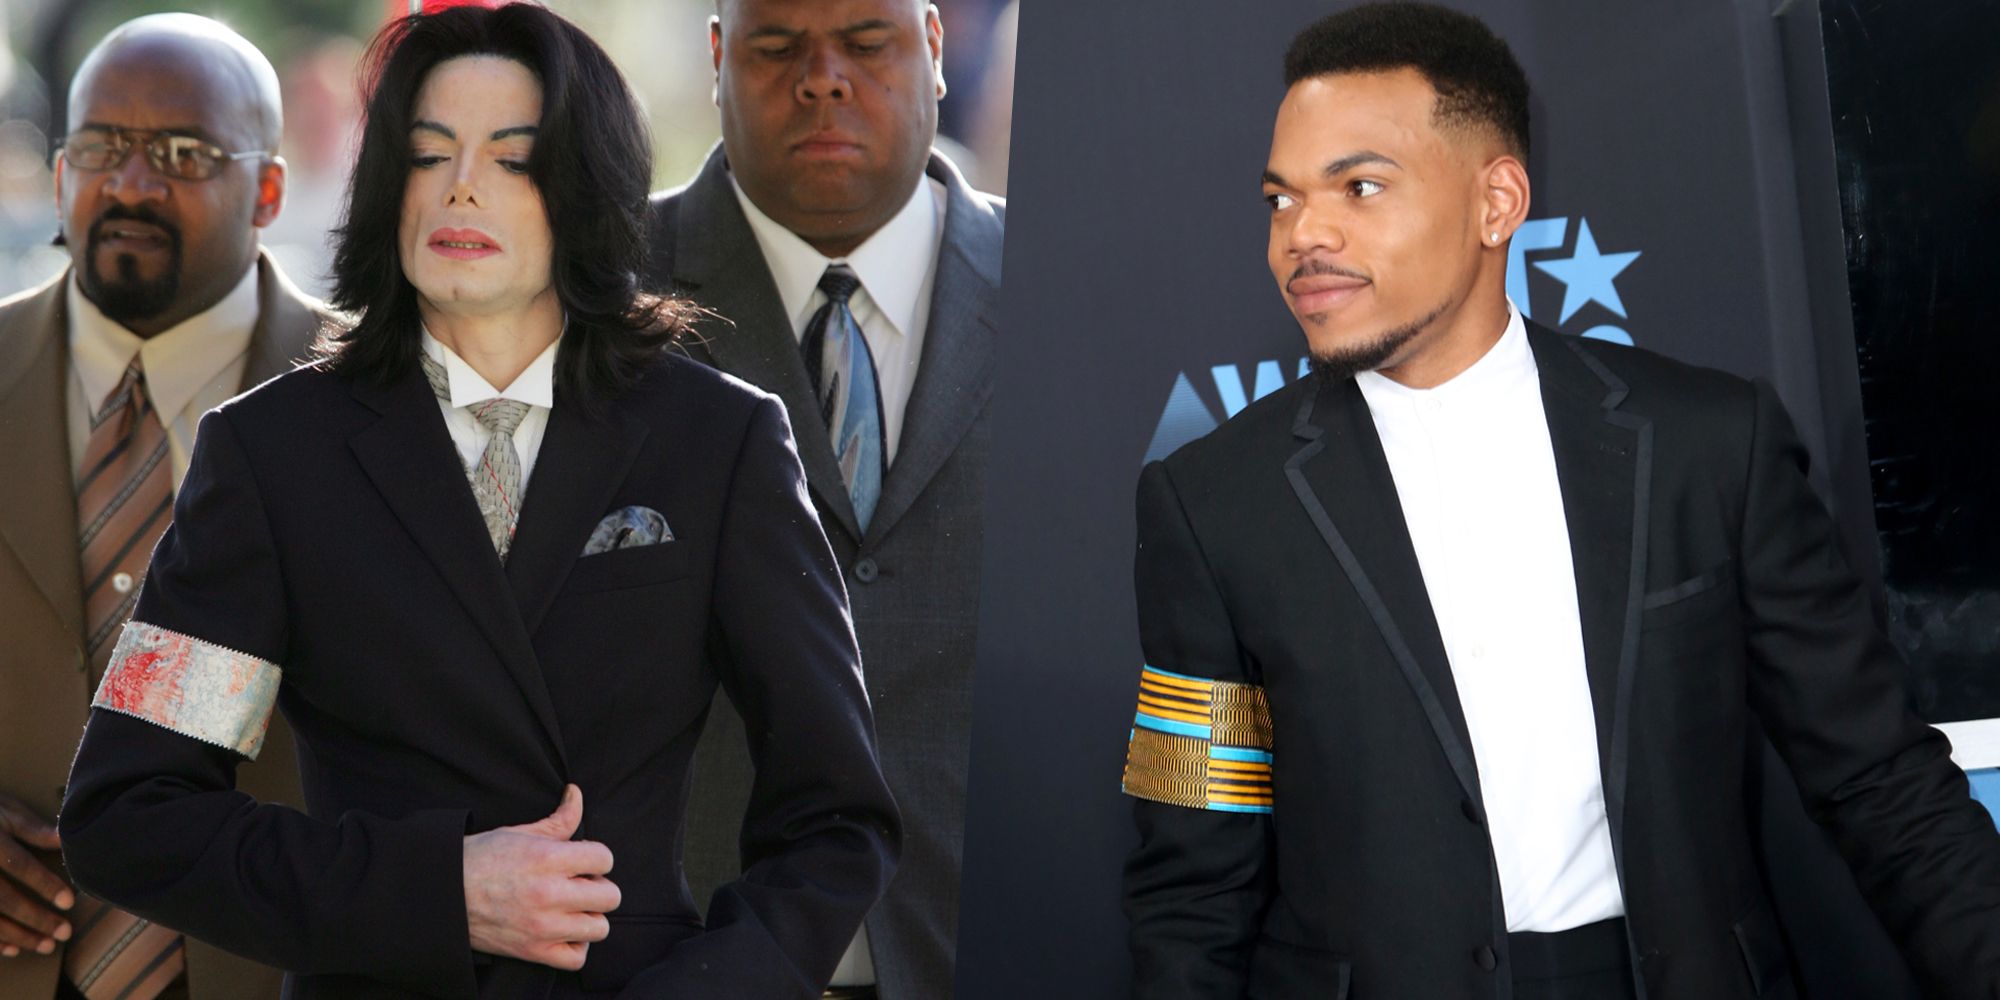 Chance the Rapper Wears Michael Jackson Suit to BET Awards